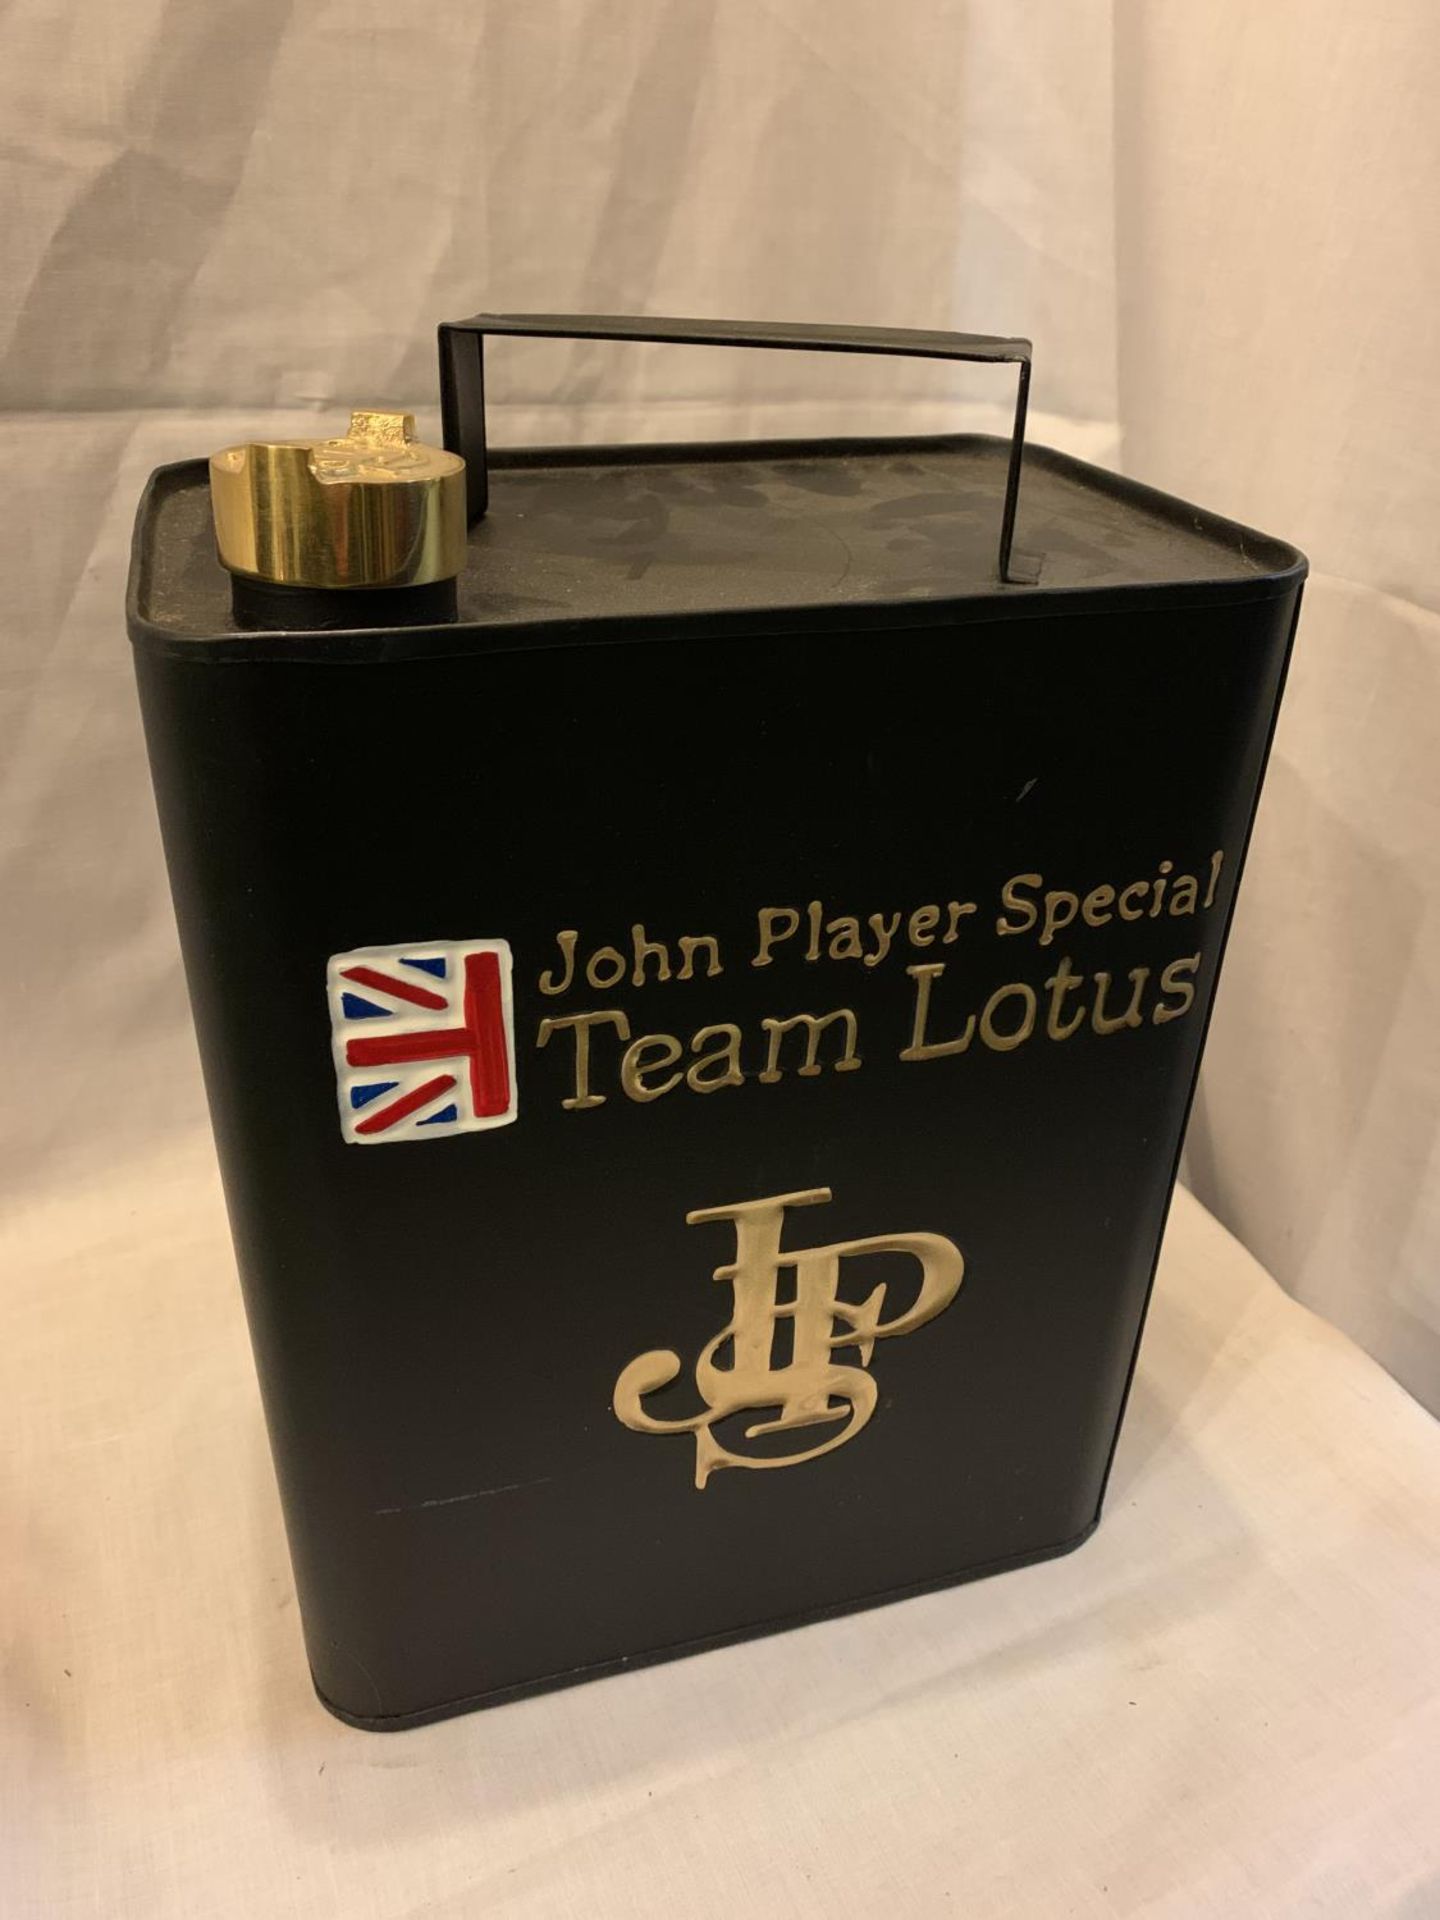 A JOHN PLAYER SPECIAL TEAM LOTUS PETROL CAN - Image 2 of 4